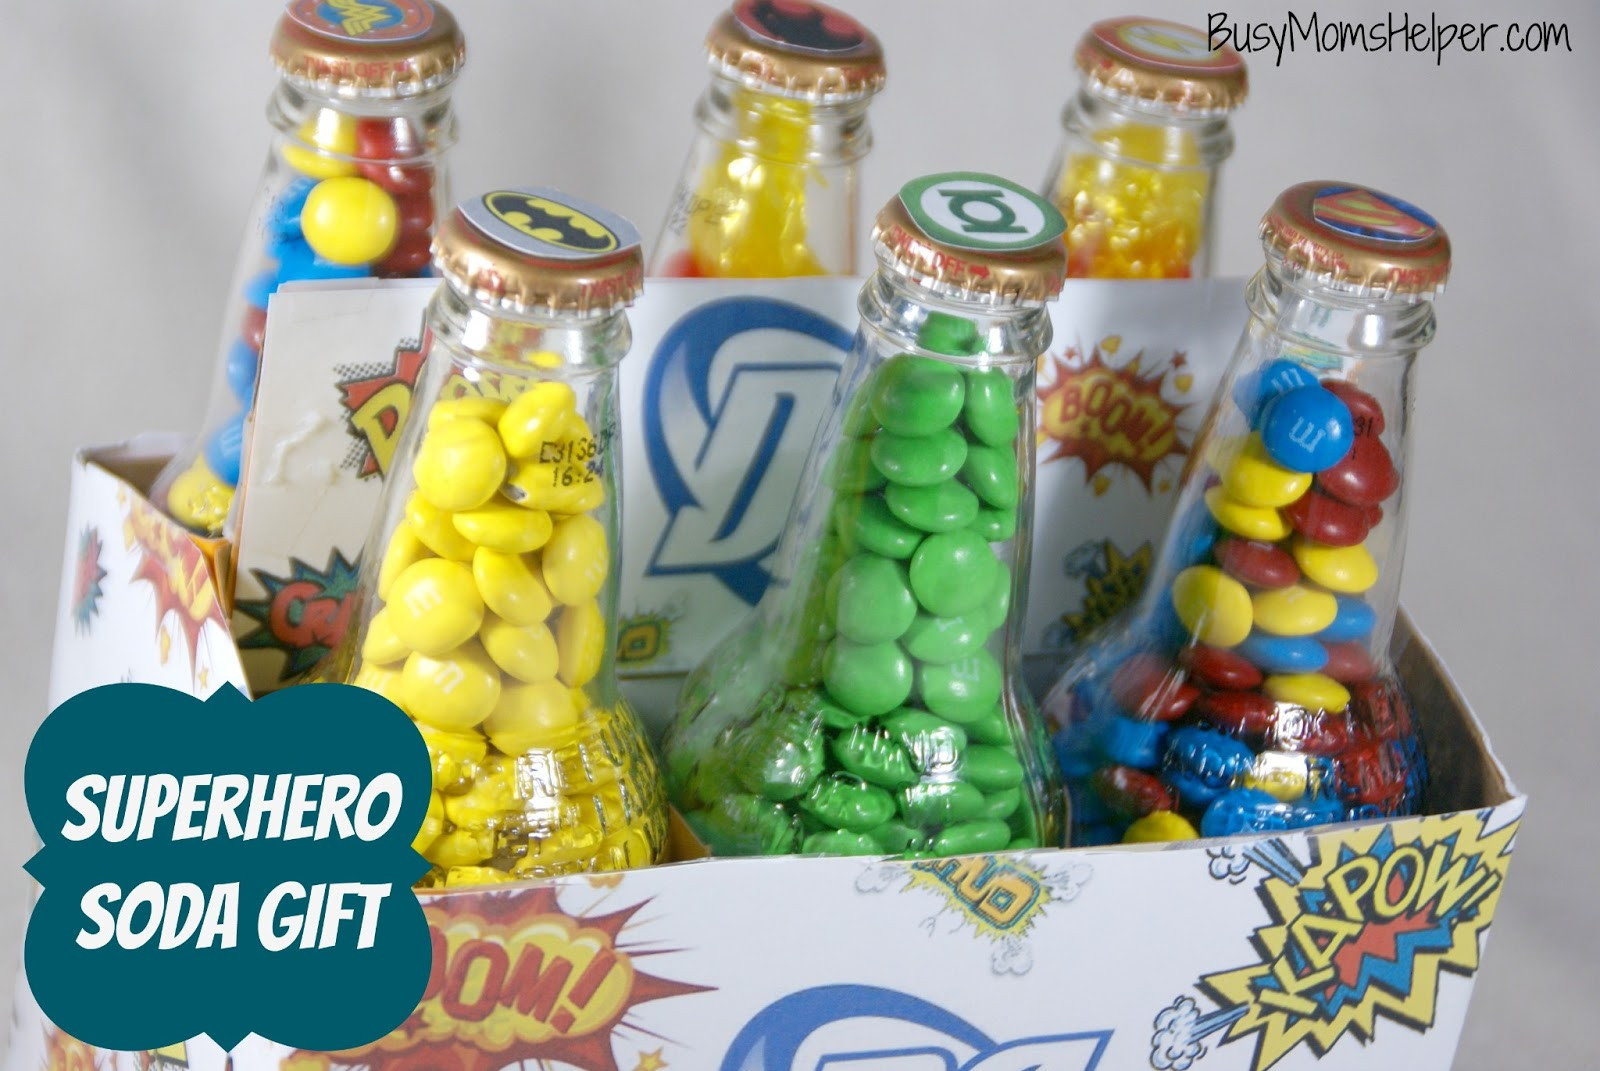 Best ideas about Superhero Gift Ideas
. Save or Pin Superhero Soda Gift Busy Mom s Helper Now.